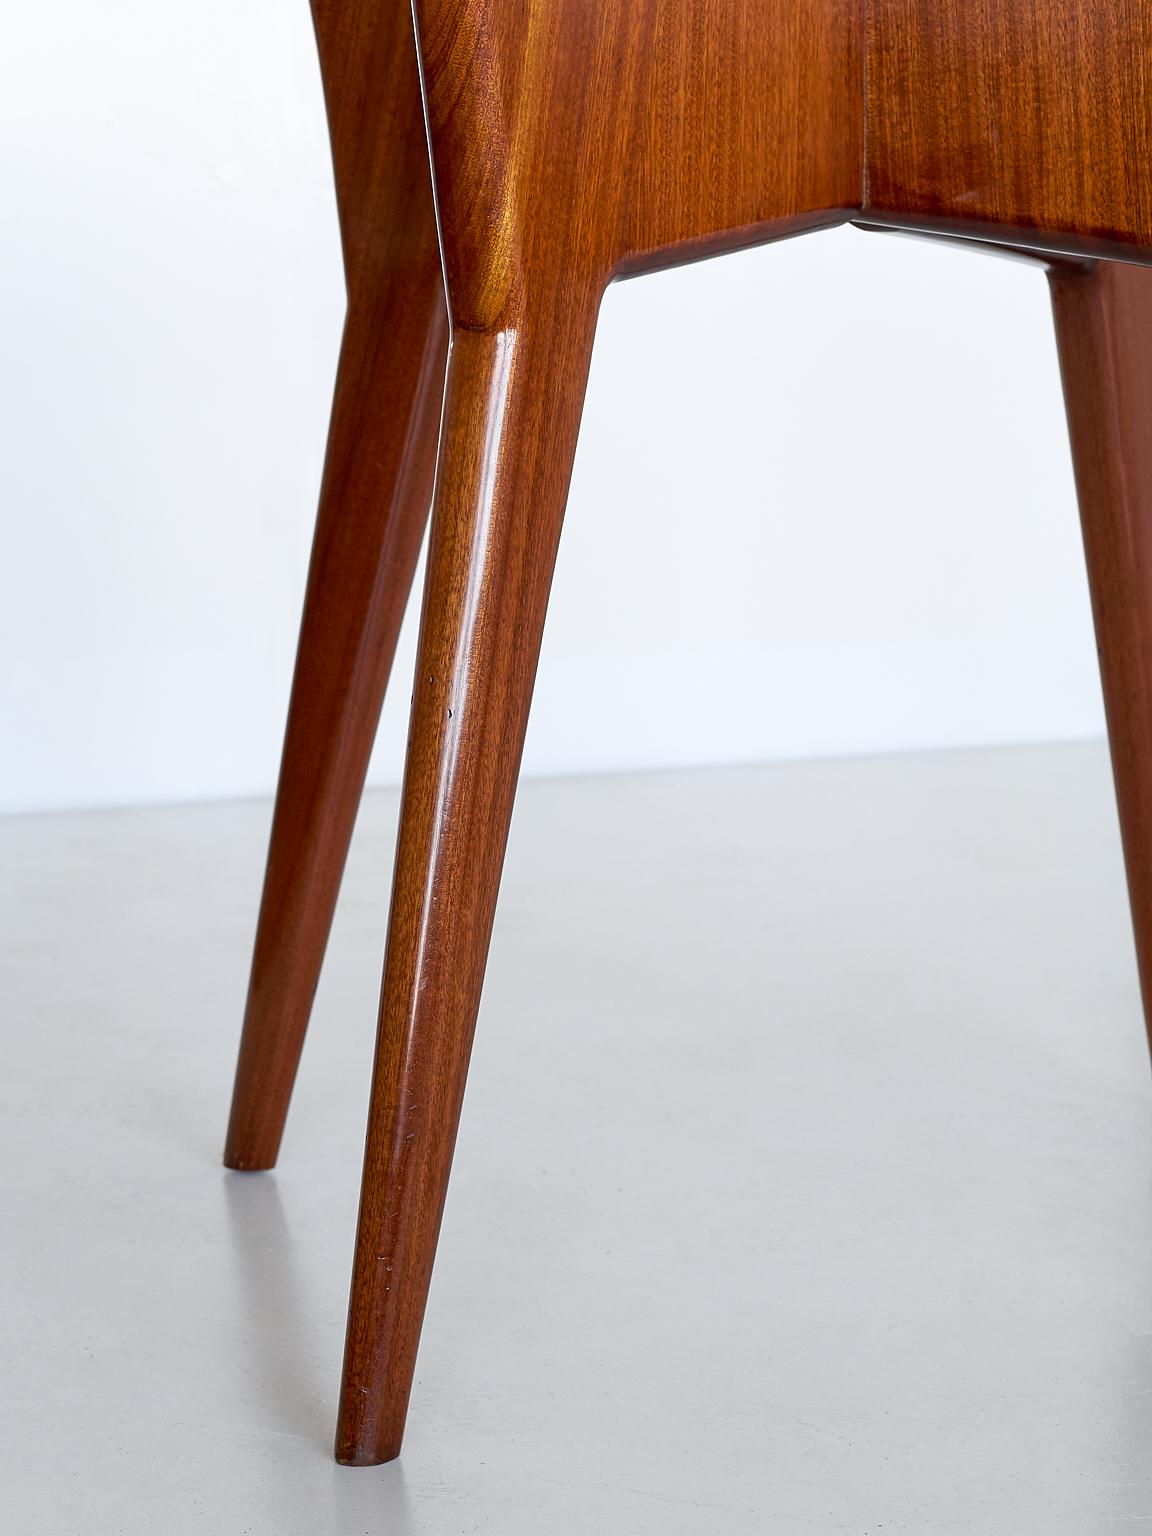 Mid-Century Modern Gio Ponti Round Dining Table in Mahogany and Thuja Burr, Italy, Early 1950s For Sale